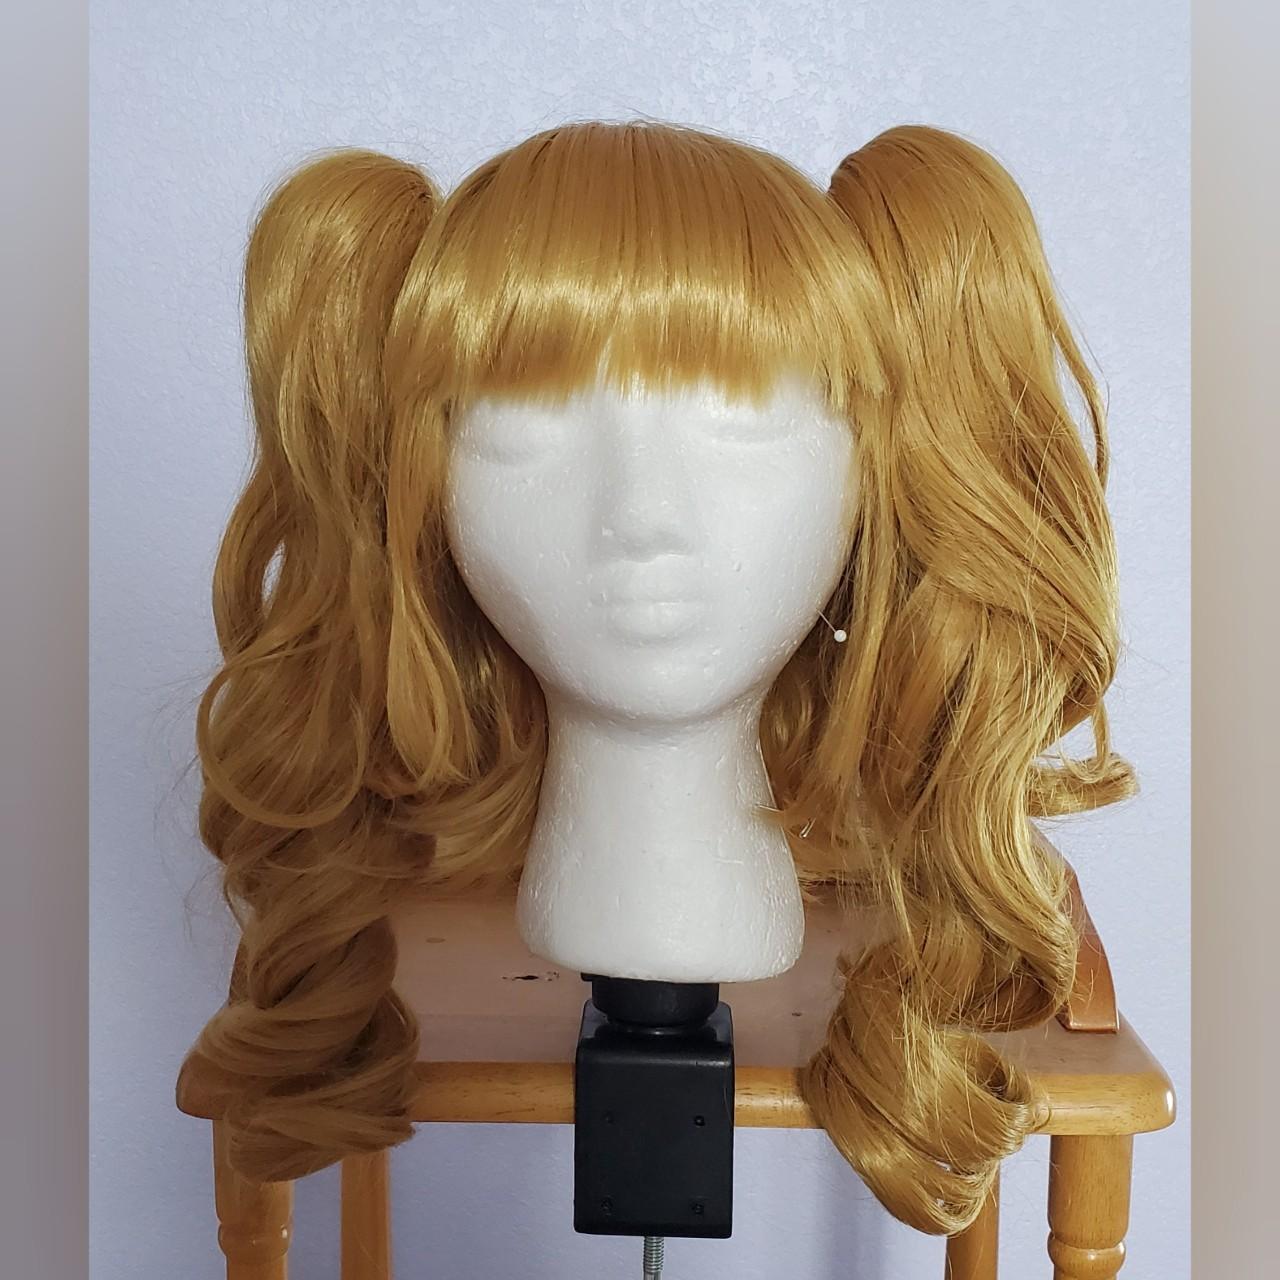 Golden Blonde Curled Twintail Wig! The two... - Depop